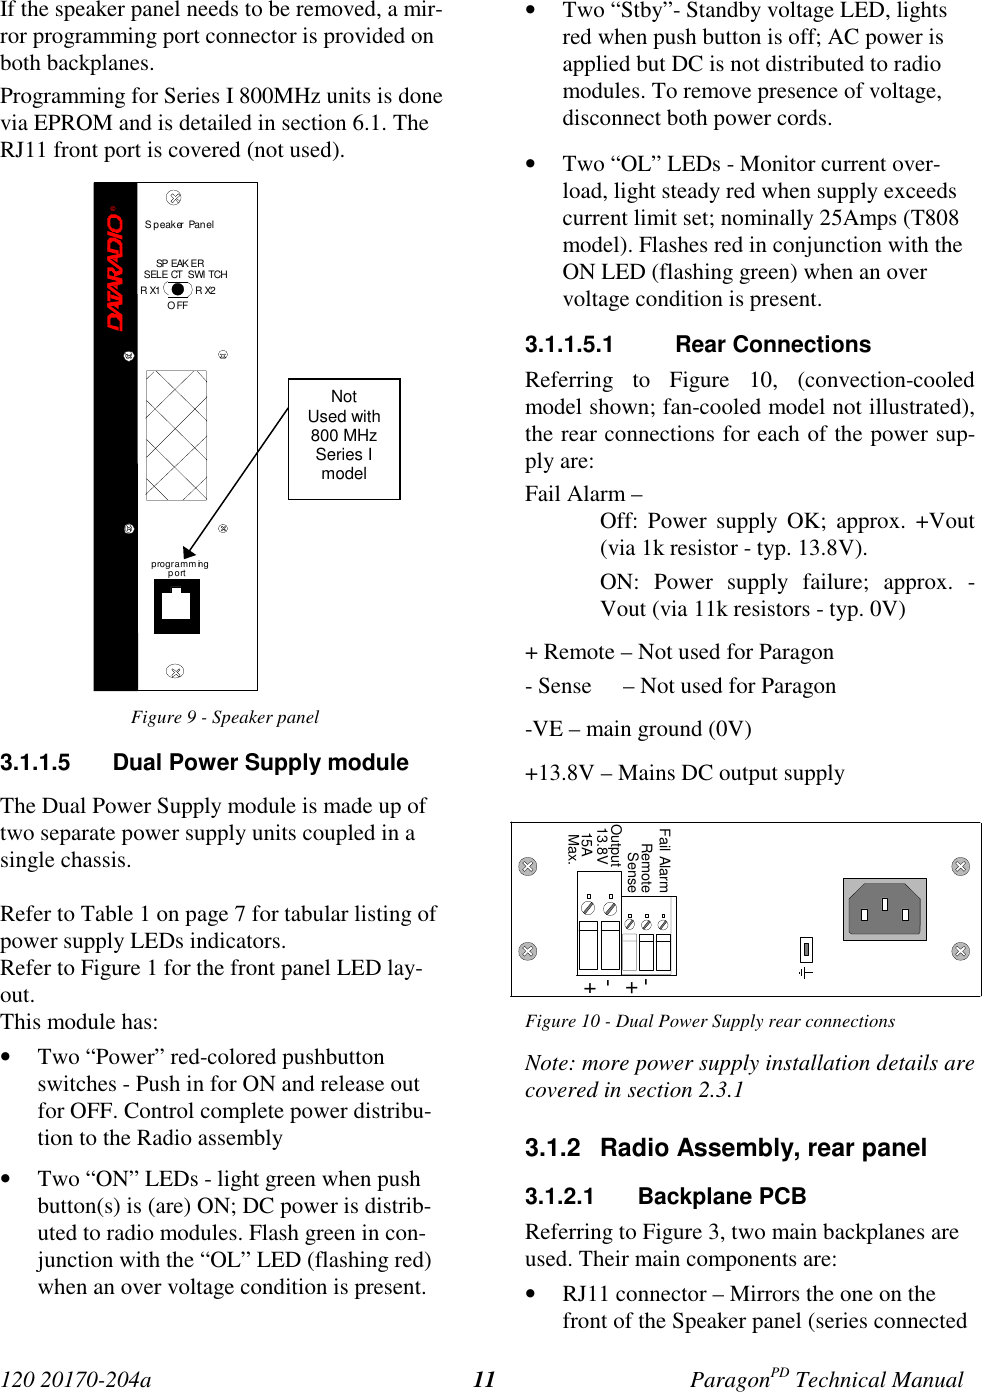 120 20170-204a ParagonPD Technical Manual11If the speaker panel needs to be removed, a mir-ror programming port connector is provided onboth backplanes.Programming for Series I 800MHz units is donevia EPROM and is detailed in section 6.1. TheRJ11 front port is covered (not used).Figure 9 - Speaker panel3.1.1.5  Dual Power Supply moduleThe Dual Power Supply module is made up oftwo separate power supply units coupled in asingle chassis.Refer to Table 1 on page 7 for tabular listing ofpower supply LEDs indicators.Refer to Figure 1 for the front panel LED lay-out.This module has:• Two “Power” red-colored pushbuttonswitches - Push in for ON and release outfor OFF. Control complete power distribu-tion to the Radio assembly• Two “ON” LEDs - light green when pushbutton(s) is (are) ON; DC power is distrib-uted to radio modules. Flash green in con-junction with the “OL” LED (flashing red)when an over voltage condition is present.• Two “Stby”- Standby voltage LED, lightsred when push button is off; AC power isapplied but DC is not distributed to radiomodules. To remove presence of voltage,disconnect both power cords.• Two “OL” LEDs - Monitor current over-load, light steady red when supply exceedscurrent limit set; nominally 25Amps (T808model). Flashes red in conjunction with theON LED (flashing green) when an overvoltage condition is present.3.1.1.5.1 Rear ConnectionsReferring to Figure 10, (convection-cooledmodel shown; fan-cooled model not illustrated),the rear connections for each of the power sup-ply are:Fail Alarm –Off: Power supply OK; approx. +Vout(via 1k resistor - typ. 13.8V).ON: Power supply failure; approx. -Vout (via 11k resistors - typ. 0V)+ Remote – Not used for Paragon- Sense     – Not used for Paragon-VE – main ground (0V)+13.8V – Mains DC output supplyFigure 10 - Dual Power Supply rear connectionsNote: more power supply installation details arecovered in section 2.3.13.1.2  Radio Assembly, rear panel3.1.2.1 Backplane PCBReferring to Figure 3, two main backplanes areused. Their main components are:• RJ11 connector – Mirrors the one on thefront of the Speaker panel (series connected®S peaker  Panelprogramm ingportRX2RX1OFFSP EAK ERSELE CT  SWI TCHNotUsed with800 MHzSeries Imodel15A+-OutputSense+-RemoteFail Alarm13.8VMax.